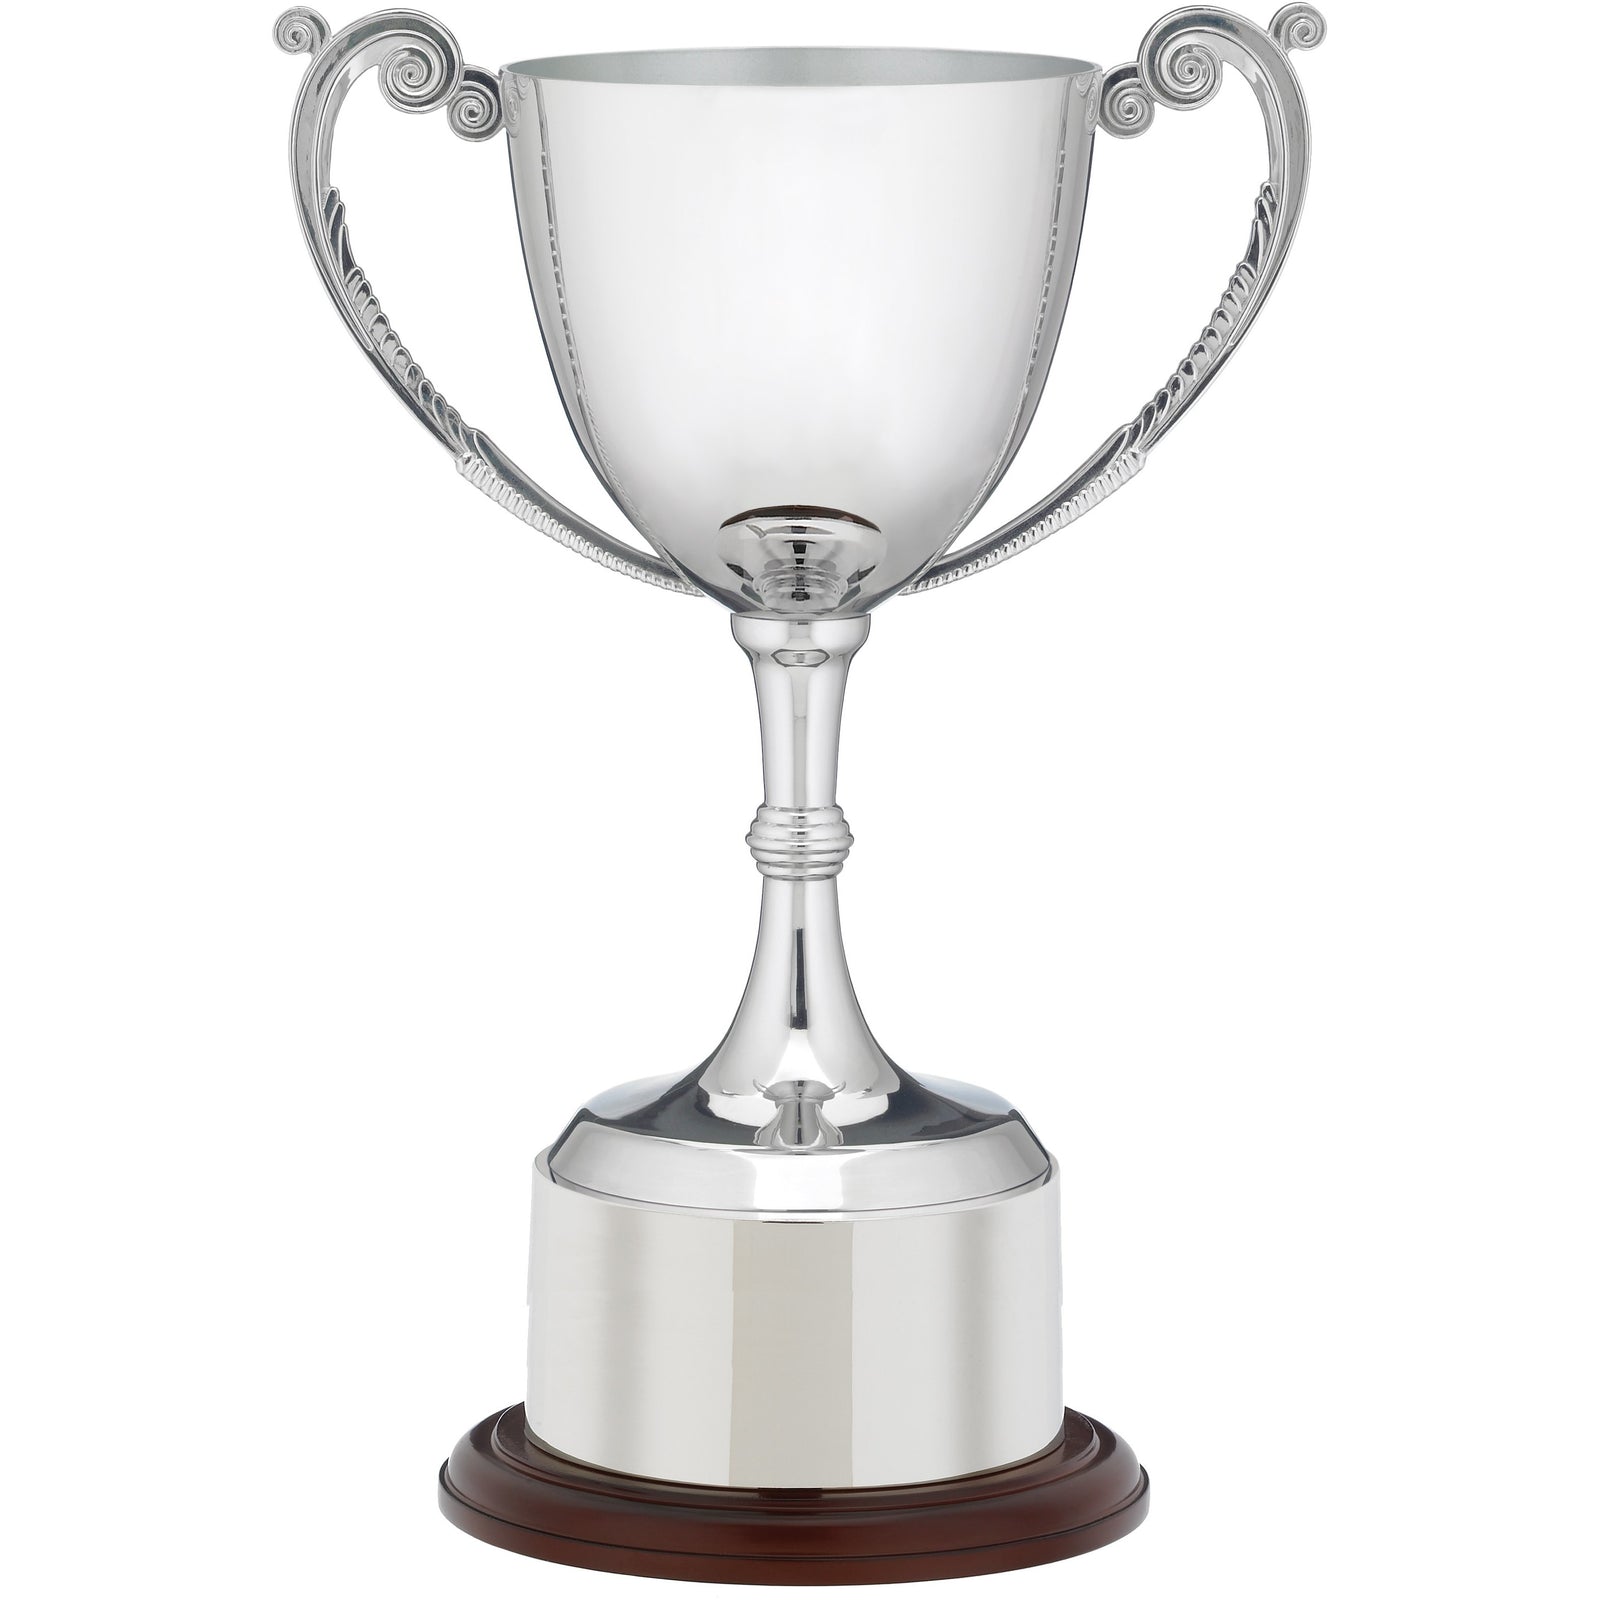 Classic Annual Presentation Trophy Cup with handles and Plinth Band - 36cm (14.25